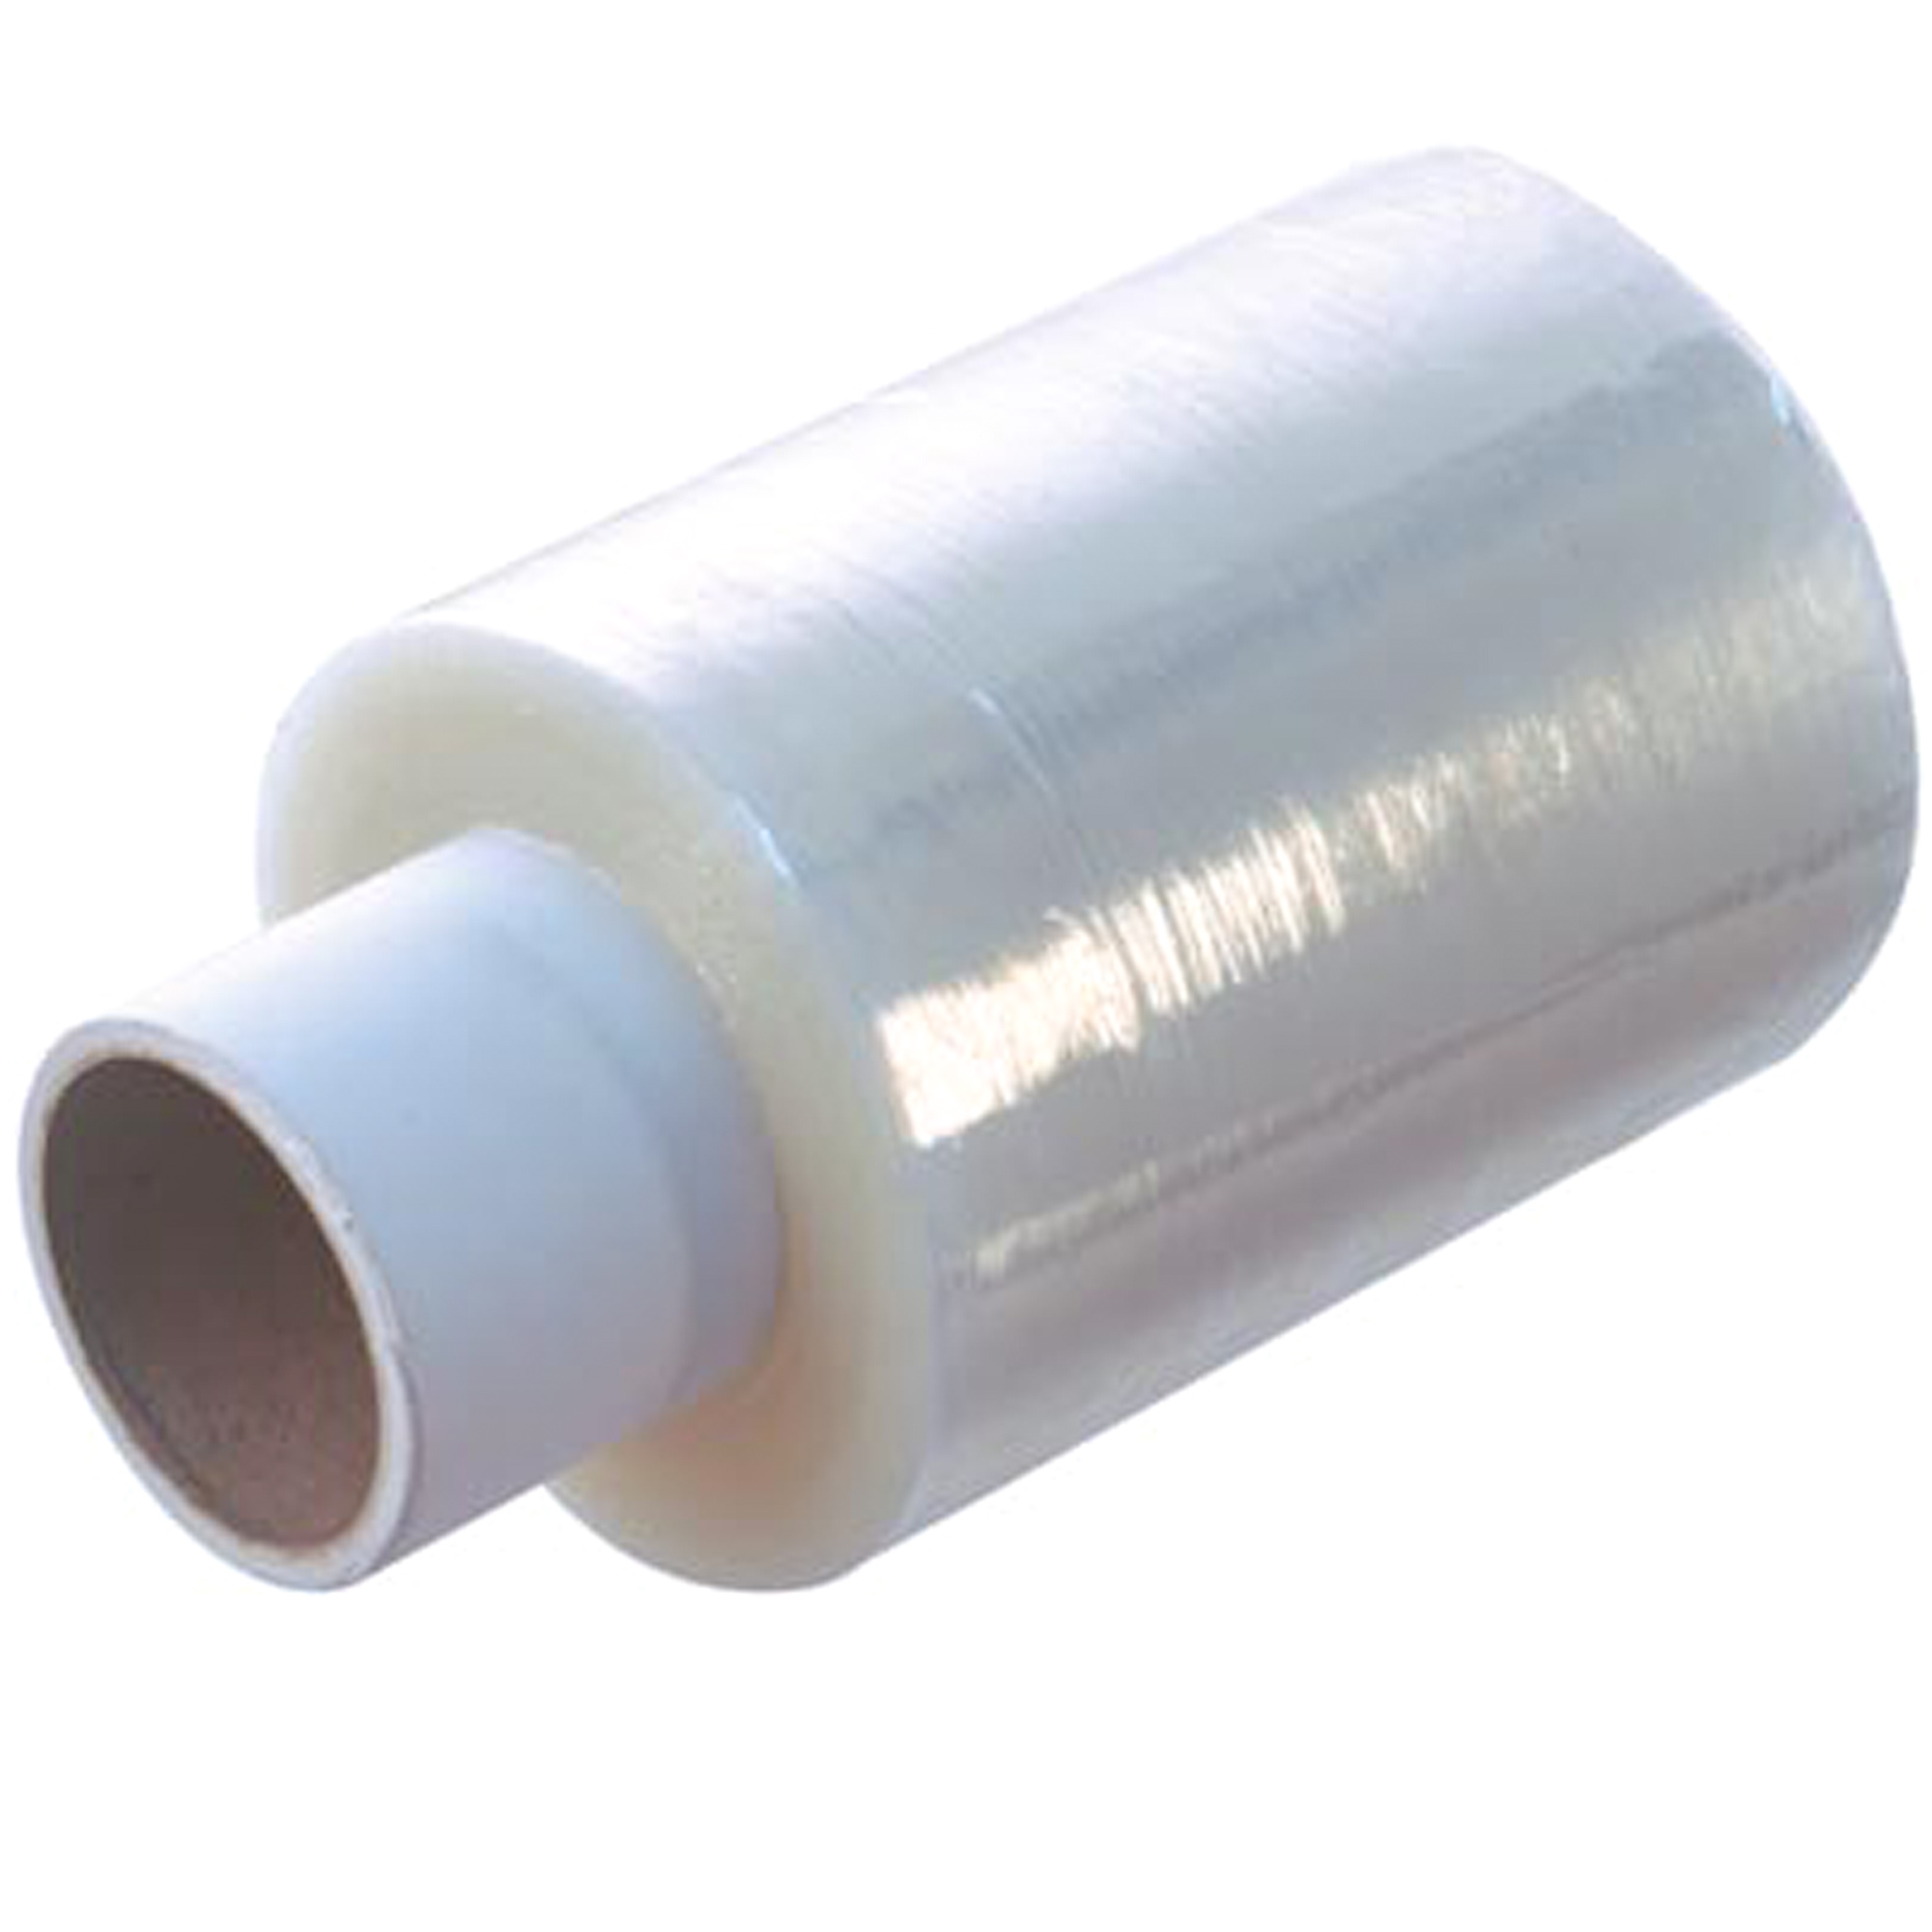 # BLACK or CLEAR STRONG HANDY STRETCH SHRINK WRAP CORE 100mm x 150M 